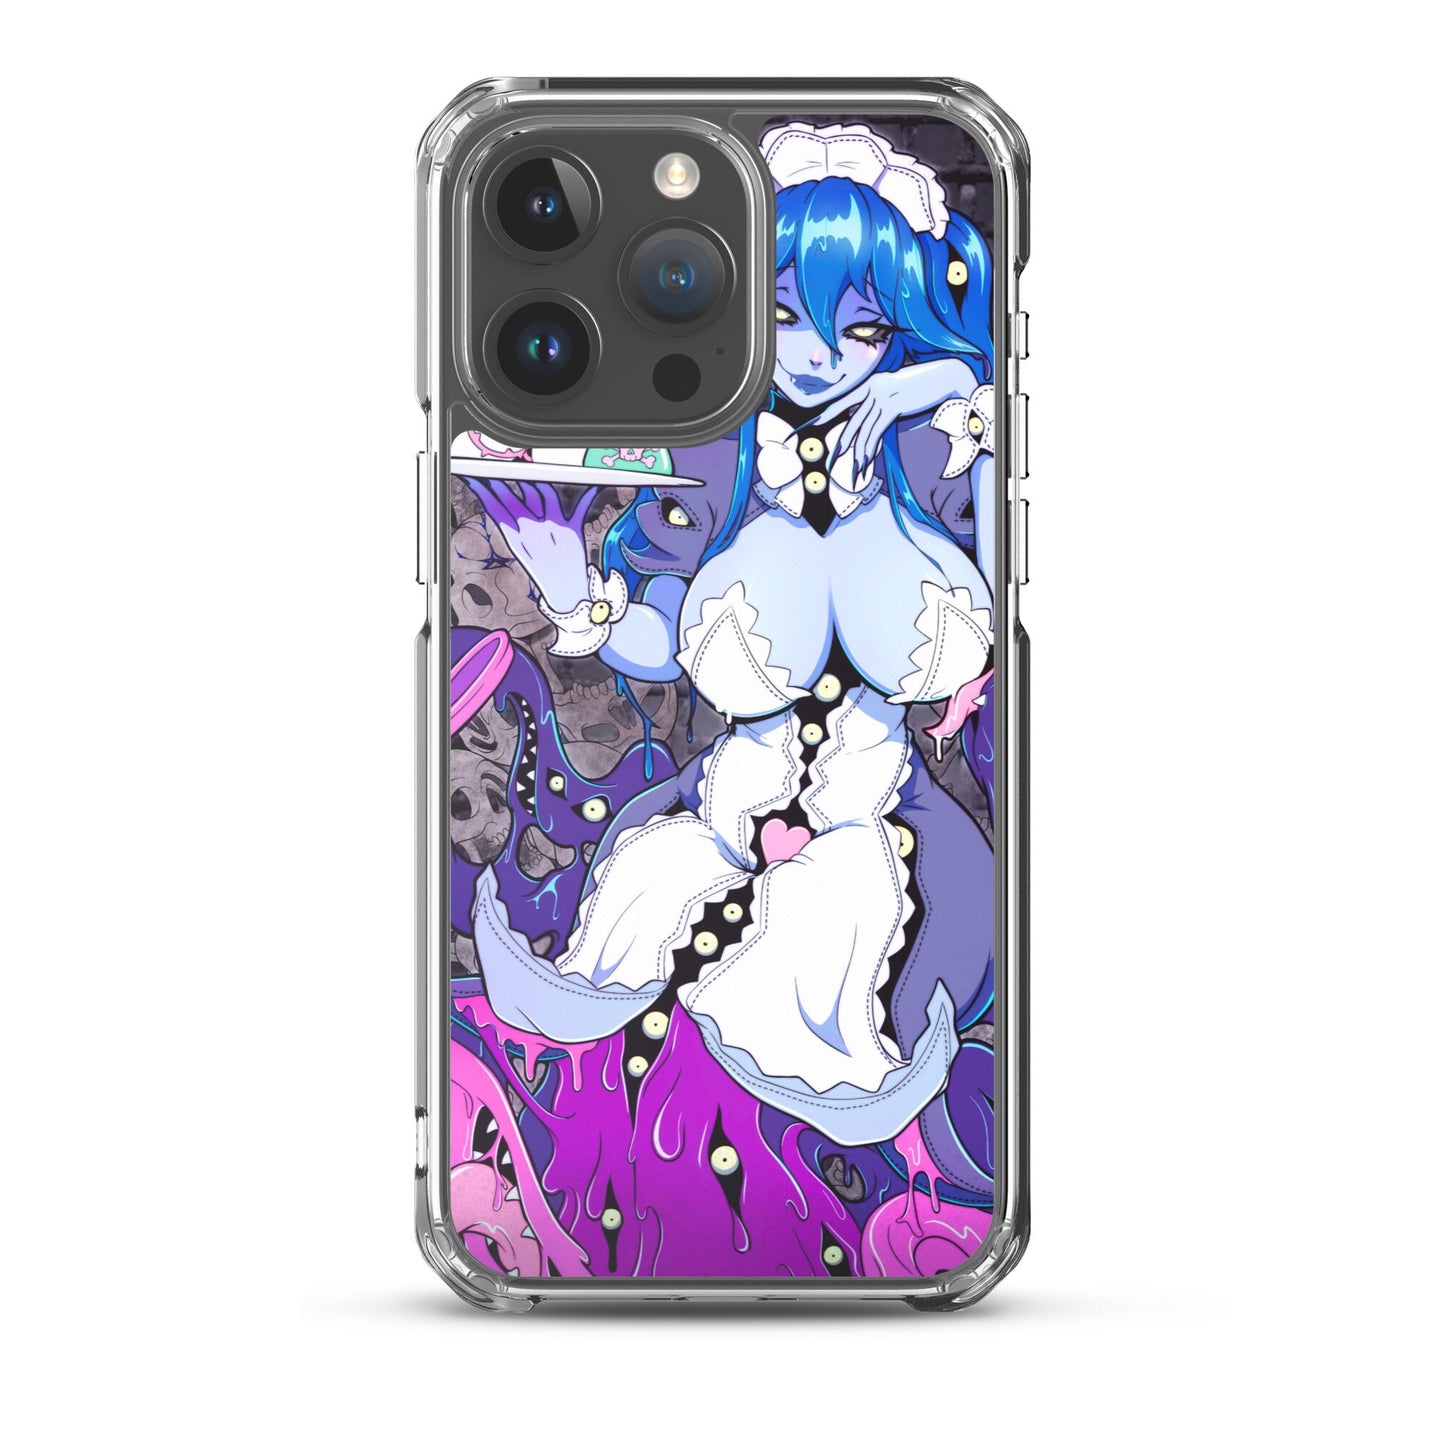 Tentacle Tease iPhone case